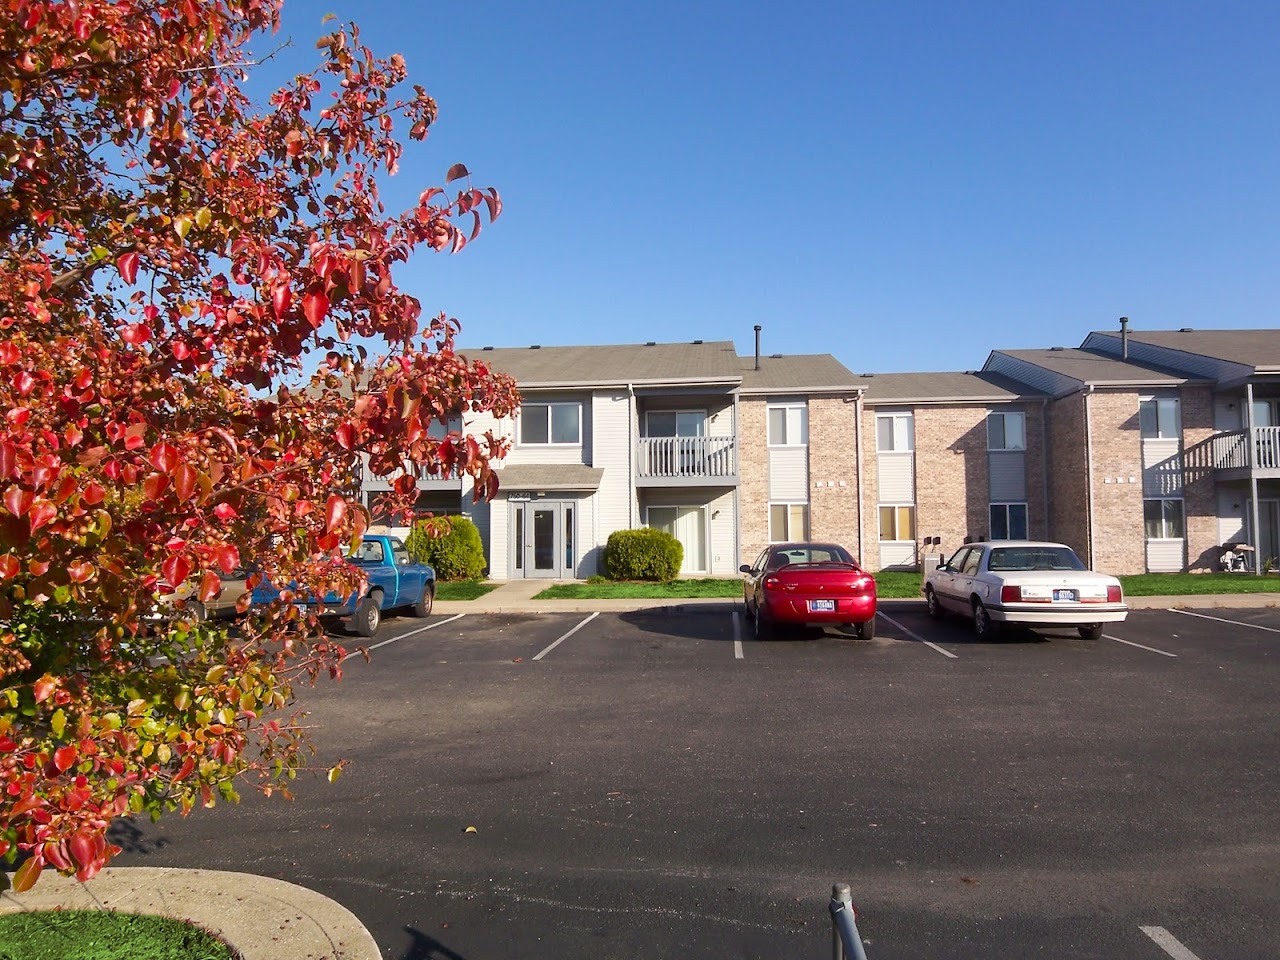 Photo of CANTERBURY HOUSE APTS (SPRINGBROOK). Affordable housing located at 701 STONE RIDGE DR FRANKFORT, IN 46041